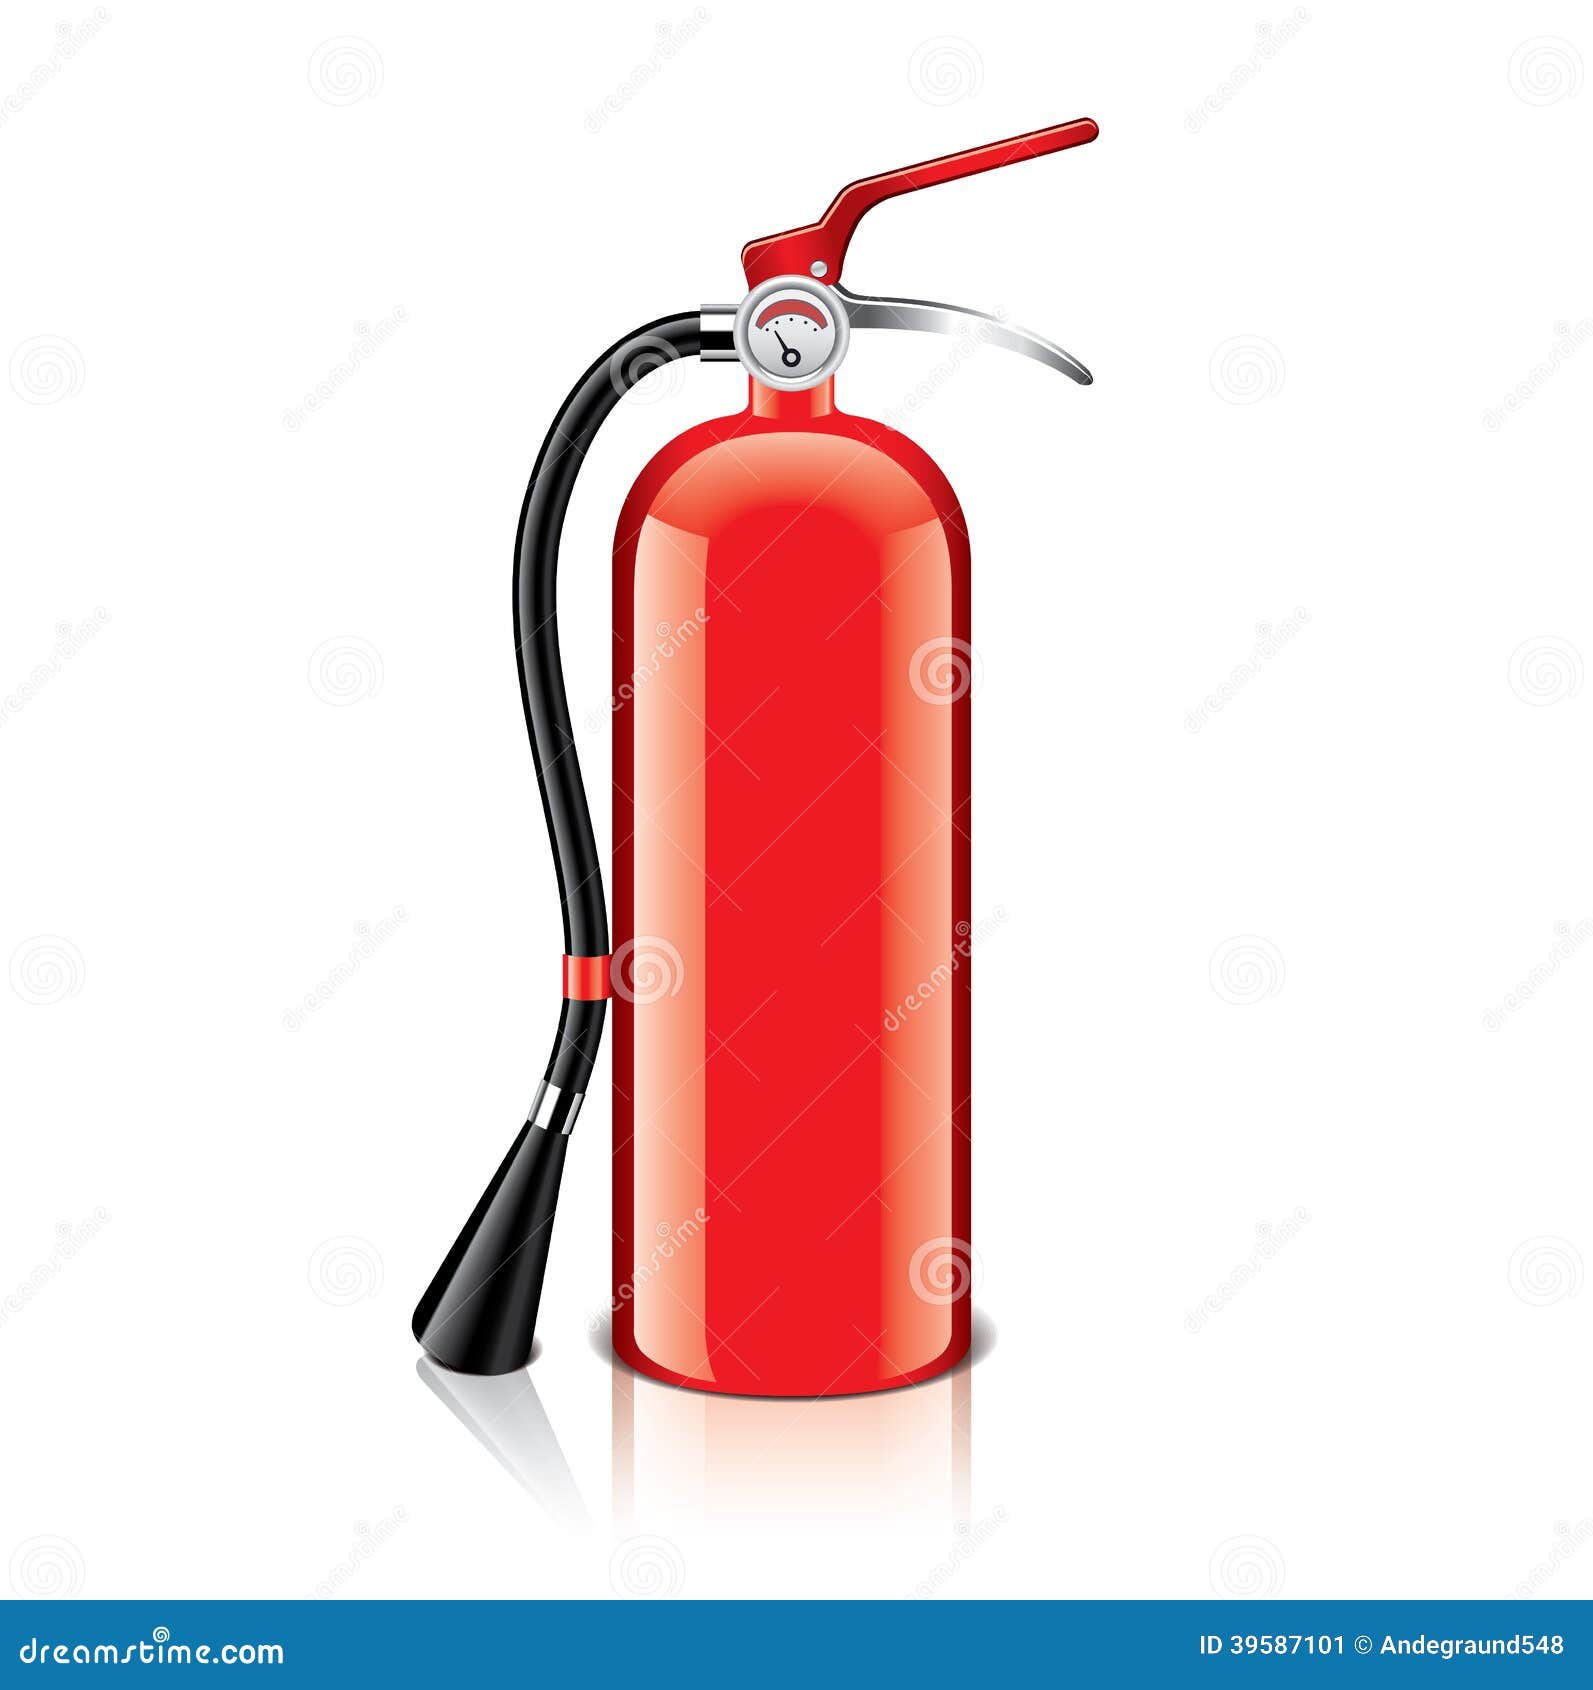 clipart fire extinguisher - photo #38